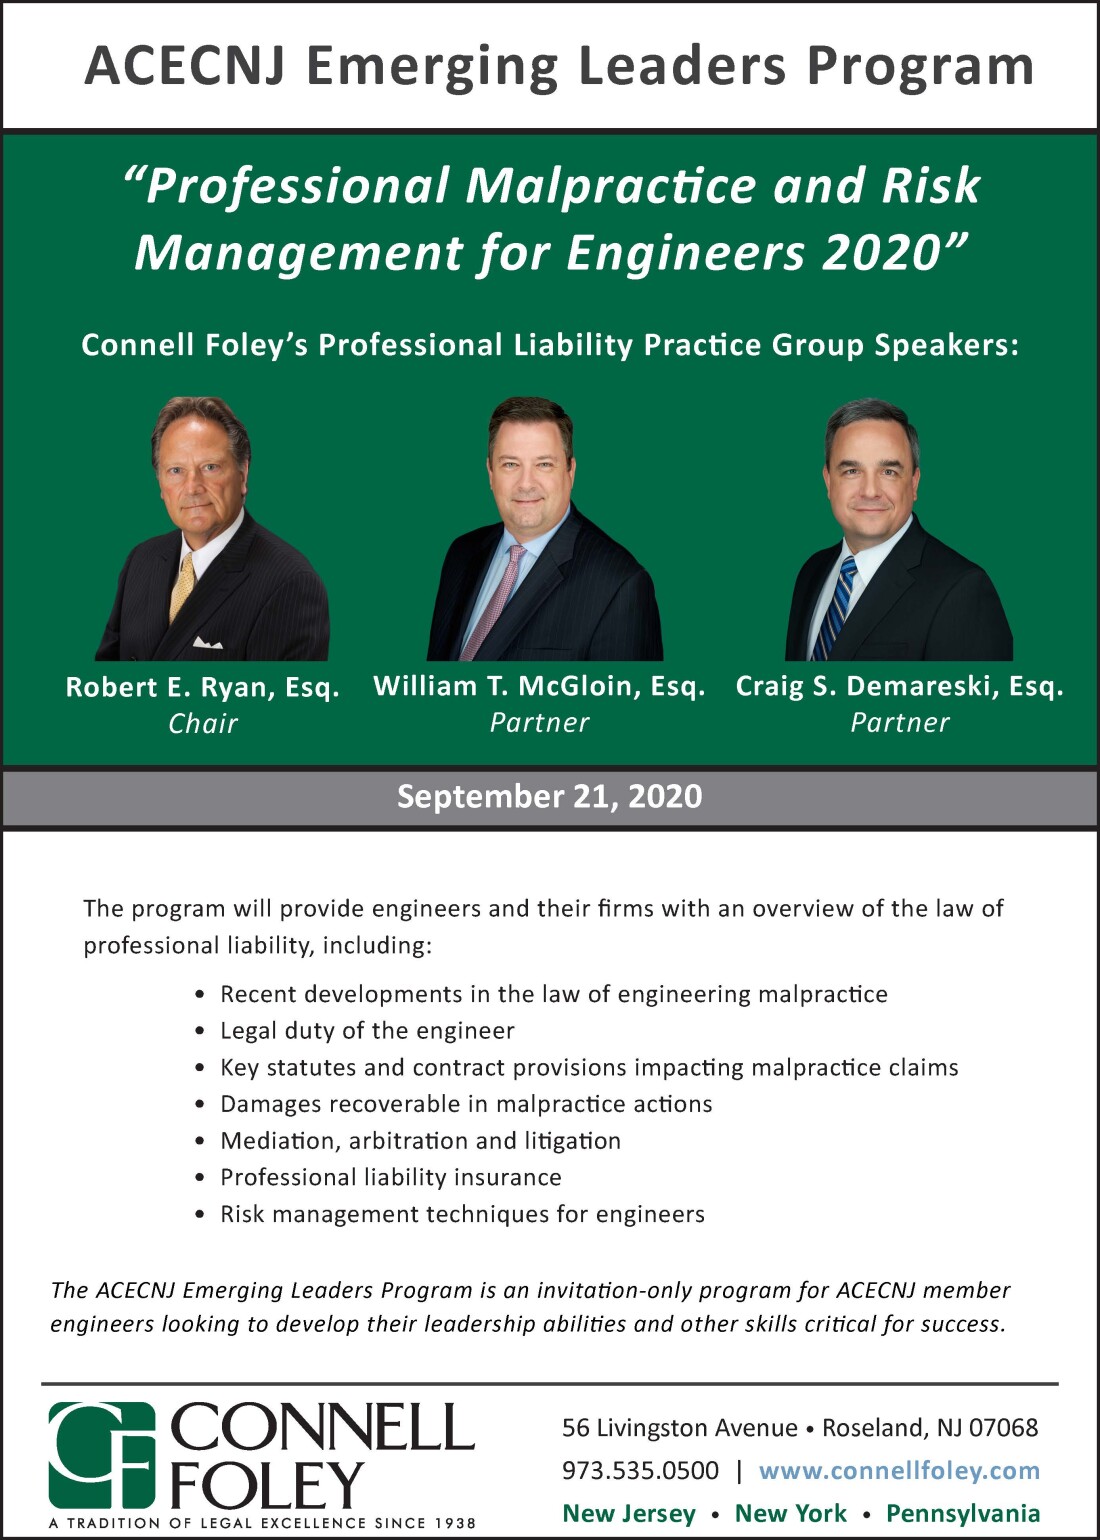 ACEC Emerging Leaders "Professional Malpractice and Risk Management for Engineers 2020"